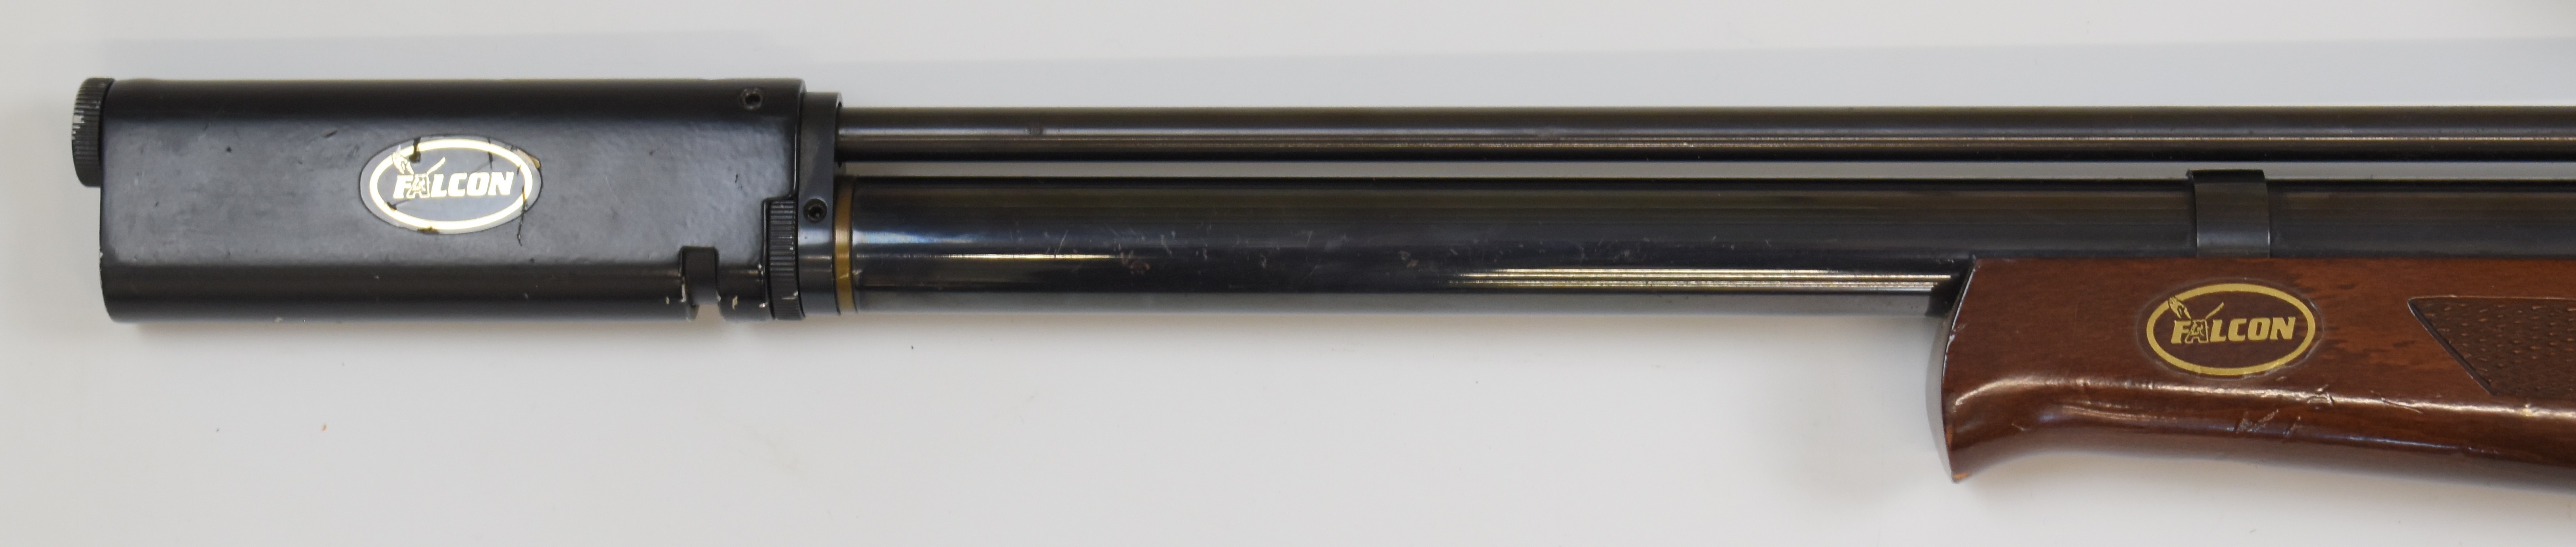 Titan/ Falcon .22 bolt-action PCP air rifle, probably by John Bowkett, with two 8-shot magazines, - Image 9 of 10